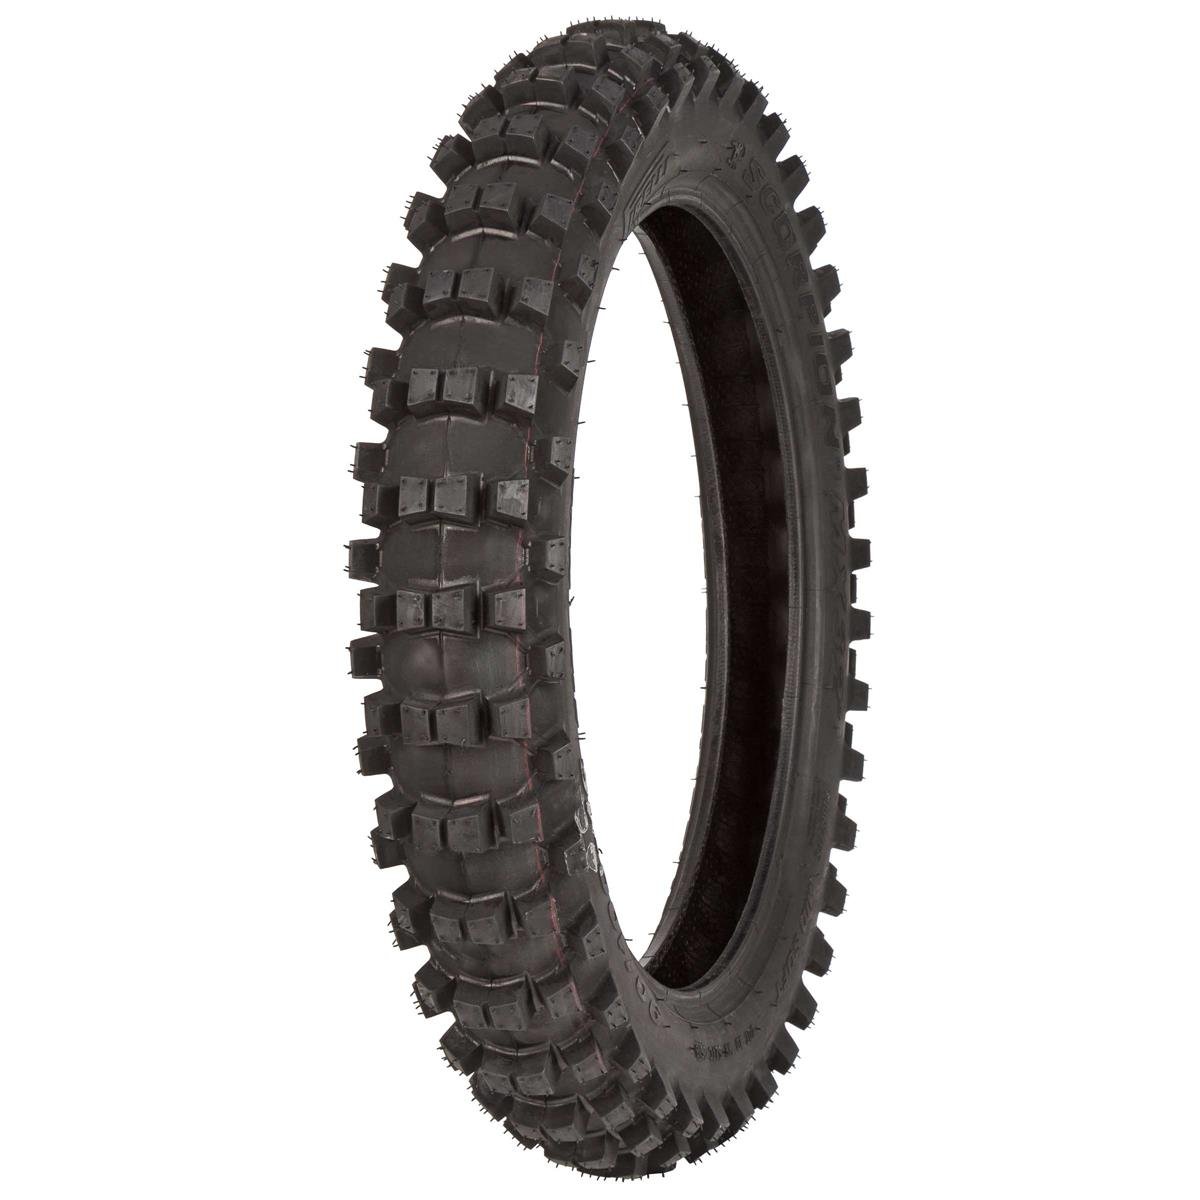 70/100-19 F 90/100-16 R with Tubes Pirelli Scorpion MX32 Mid Soft Dirt Bike Front and Rear Motocross Tires Set with Inner Tubes and Authentic Pirelli Key Chain 